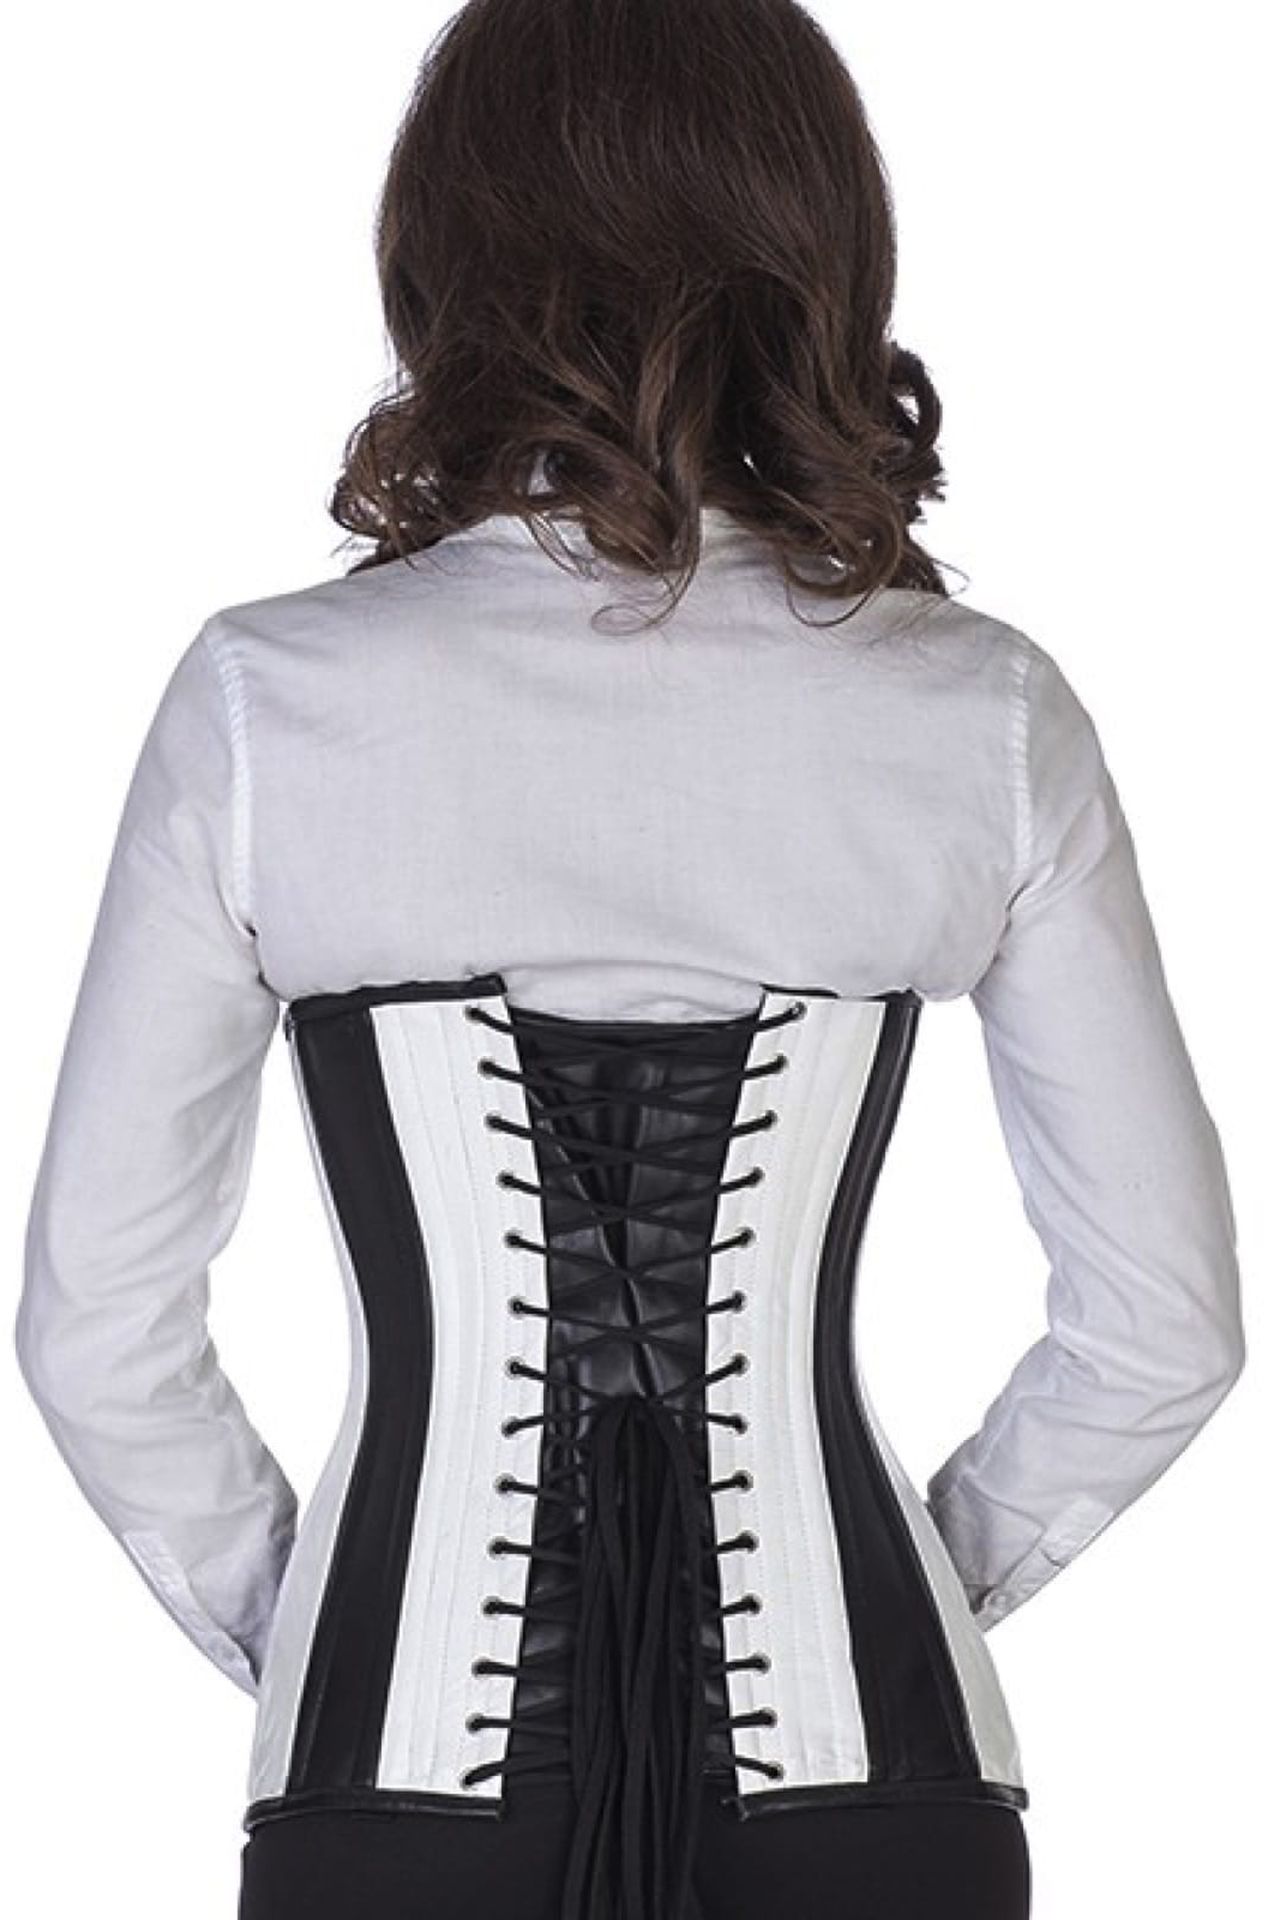 Corset black white leather curved underbust ln35